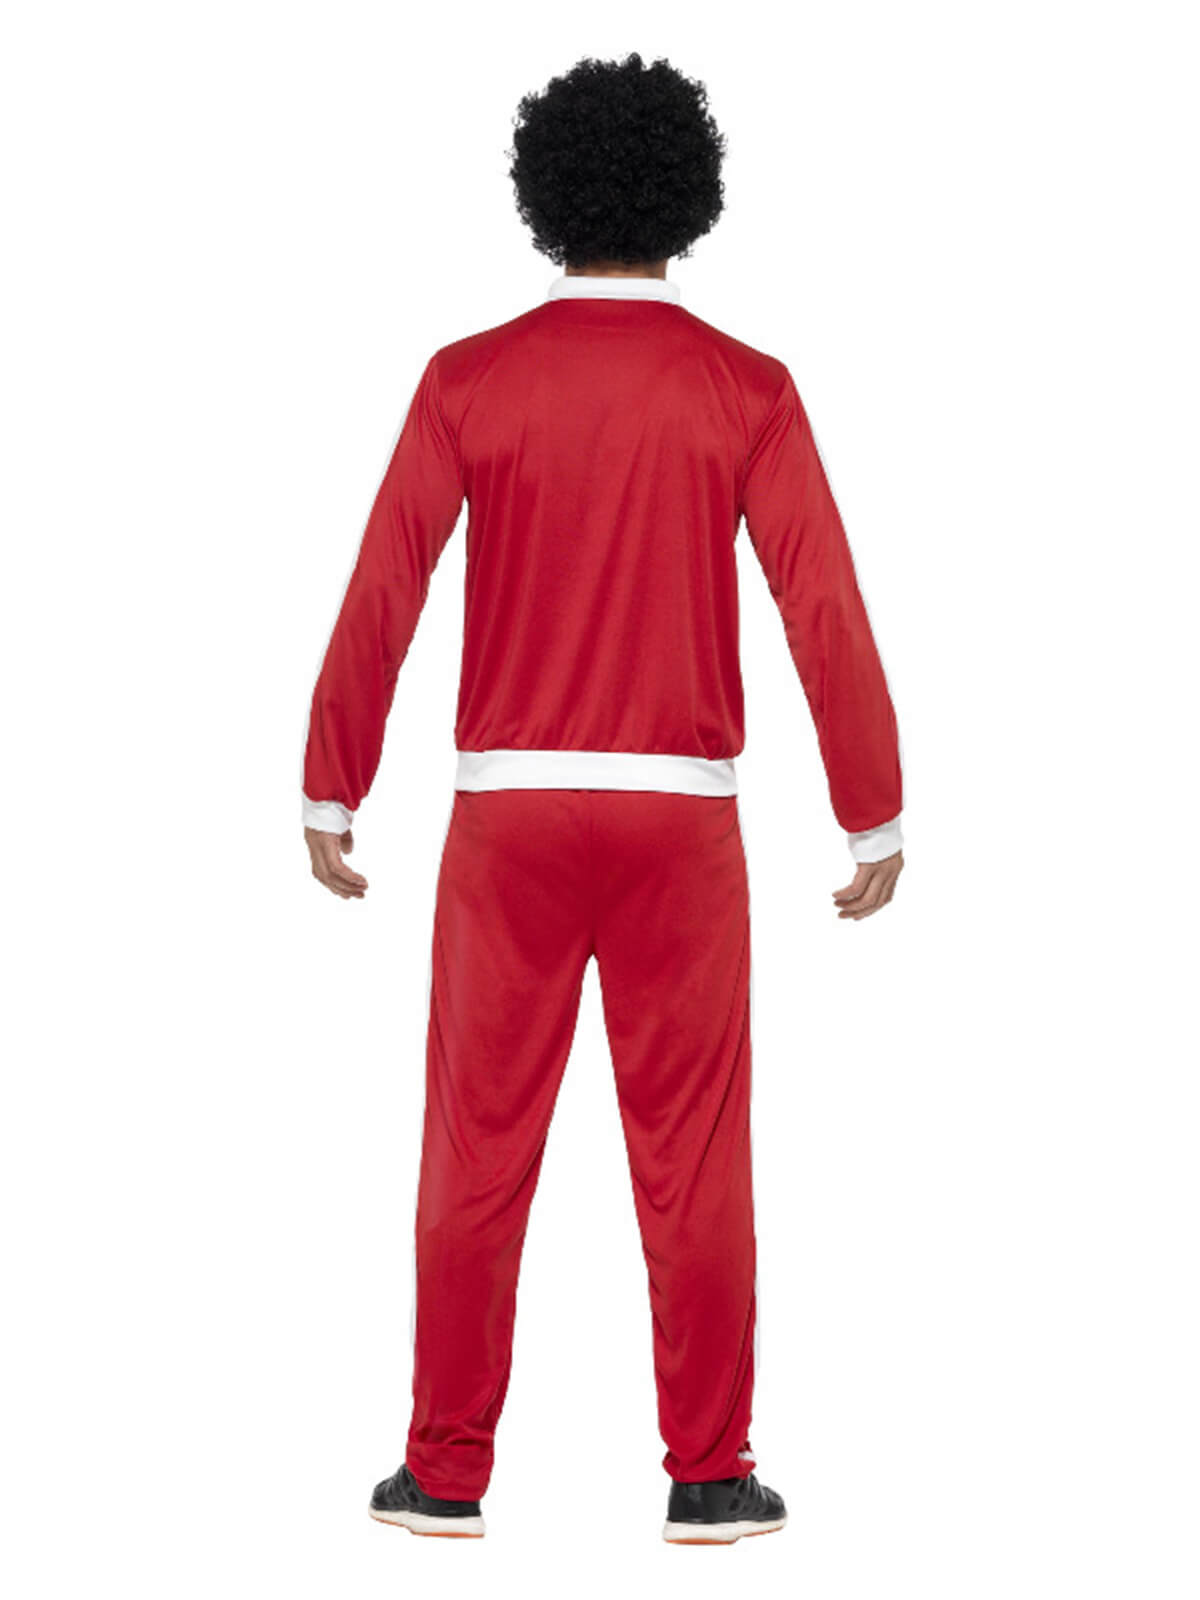 Scouser Tracksuit, Red